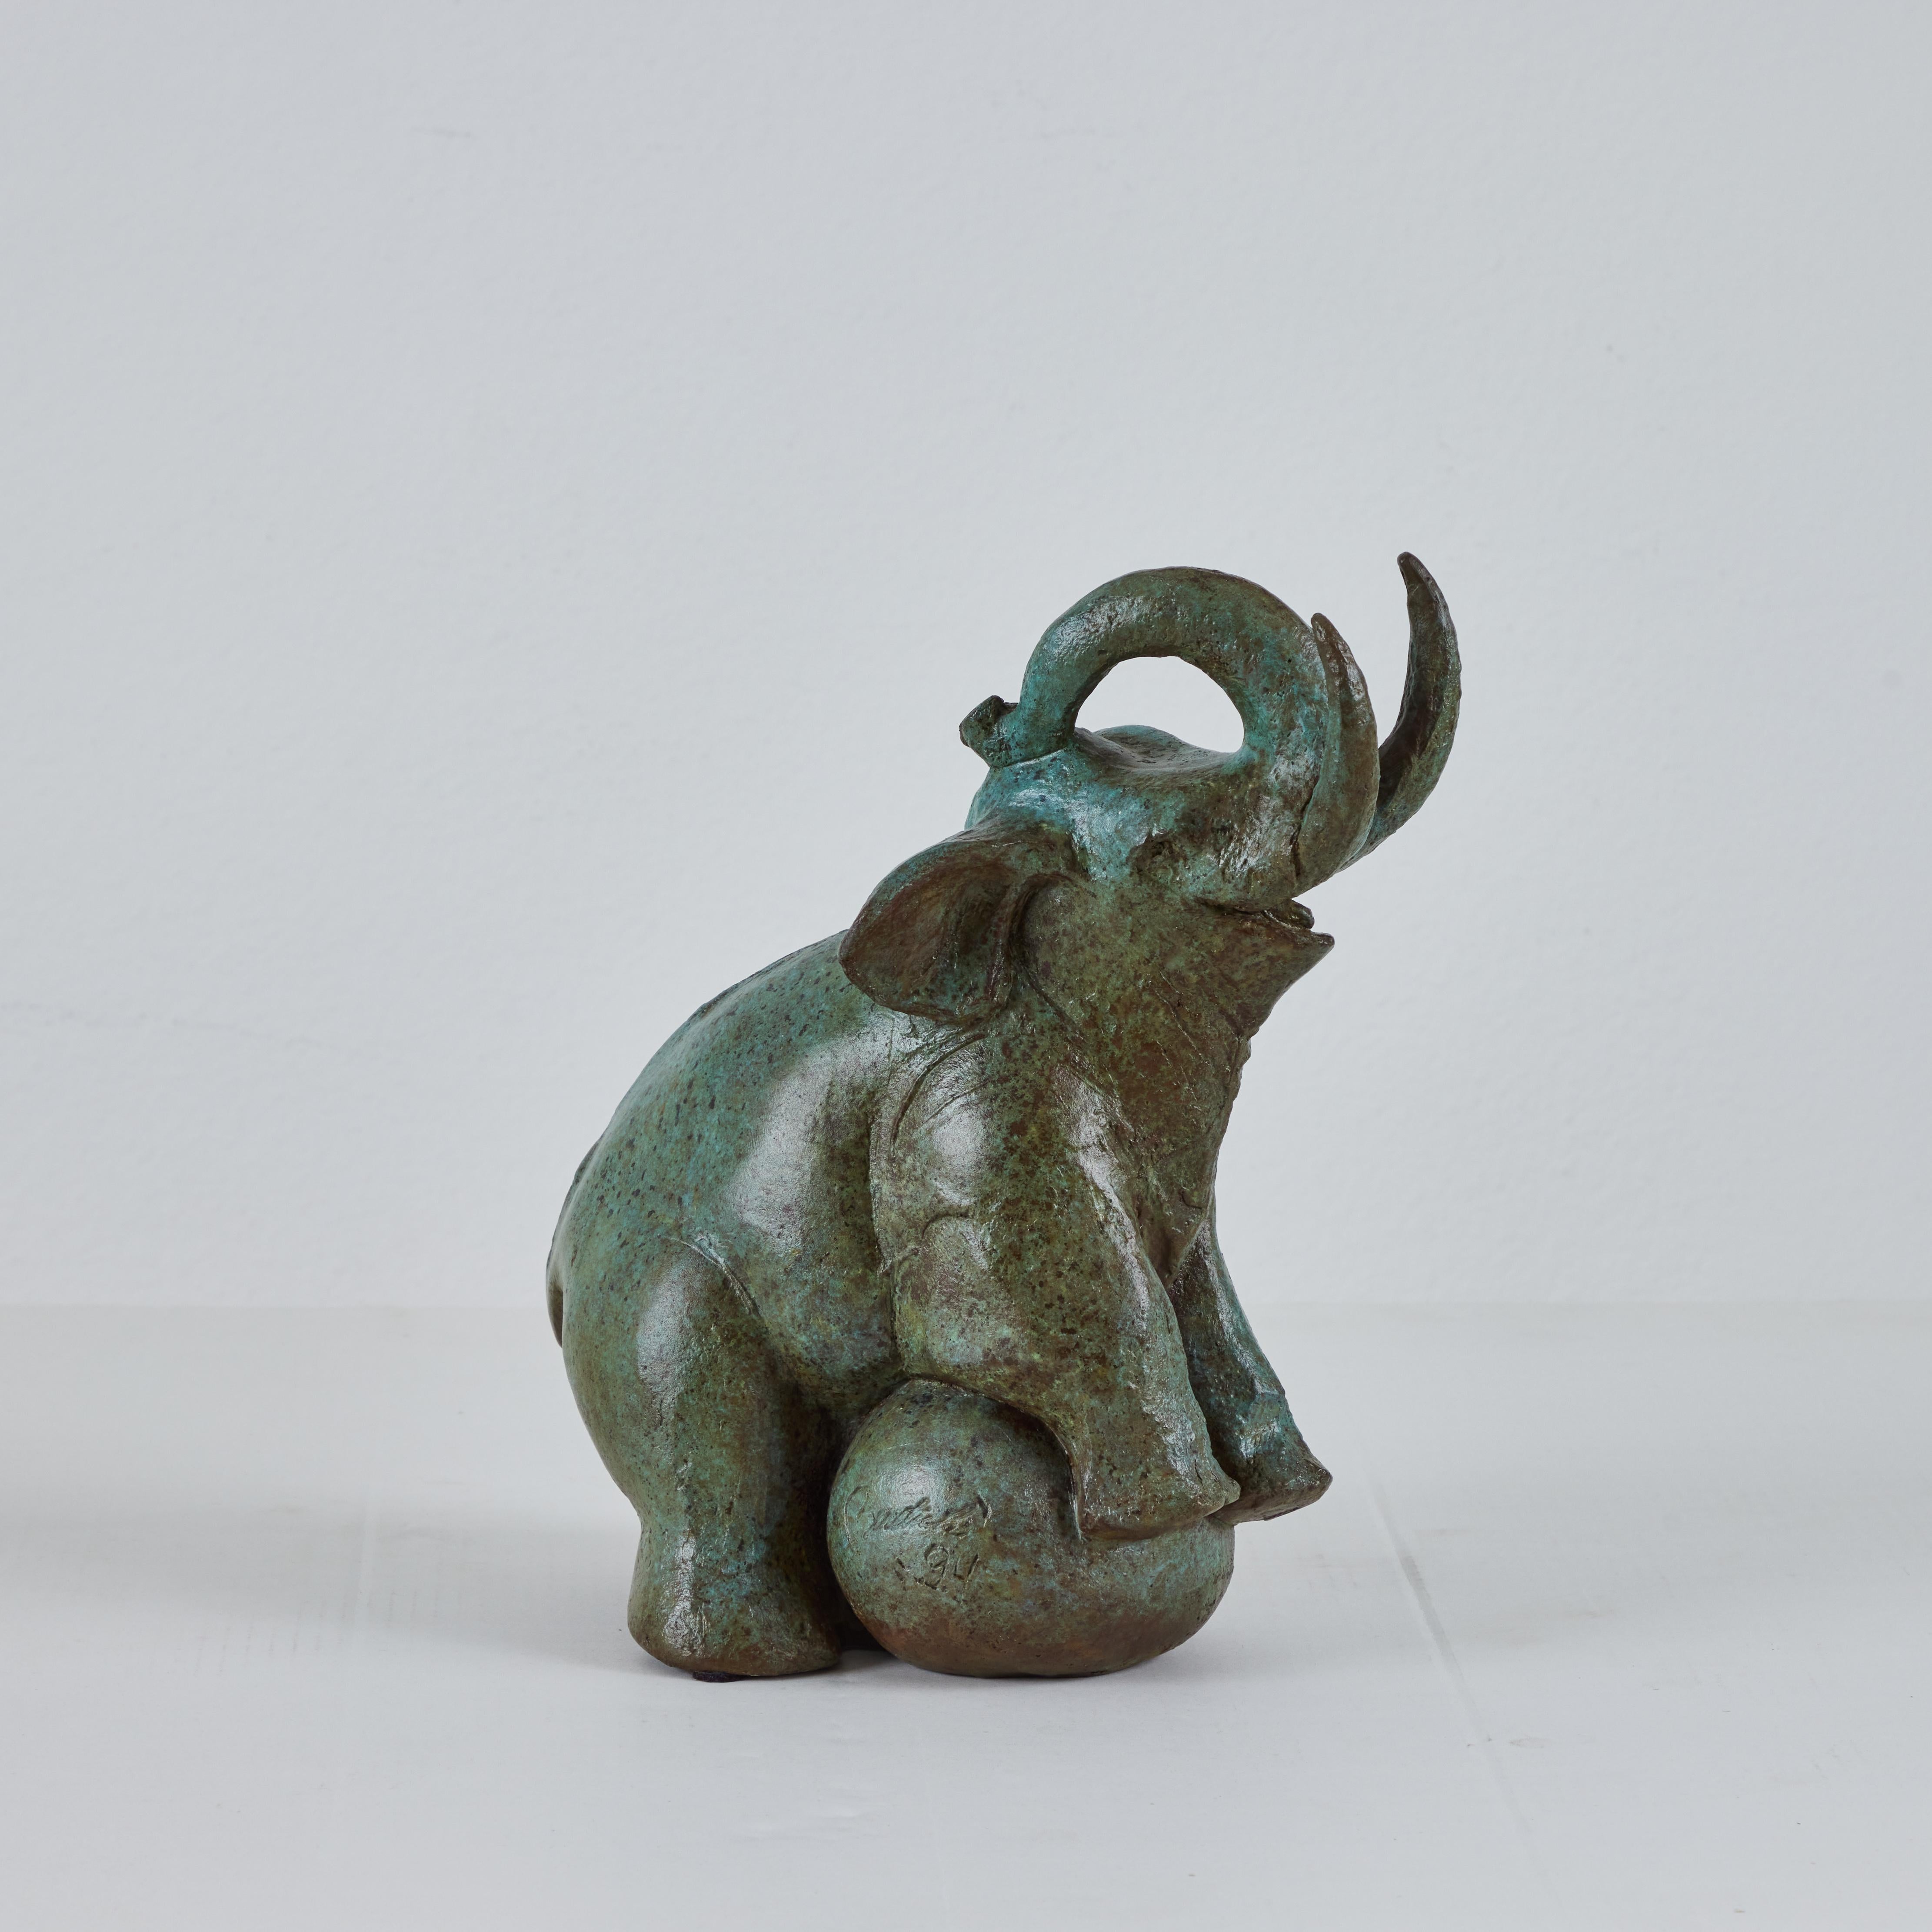 This is a beautifully sculpted bronze elephant by Barbara Beretich. The elephant comes across as a playful with one of his front legs raised on a ball much like a circus elephant. His trunk is curled up and tusks raised.  the bronze is signed on the